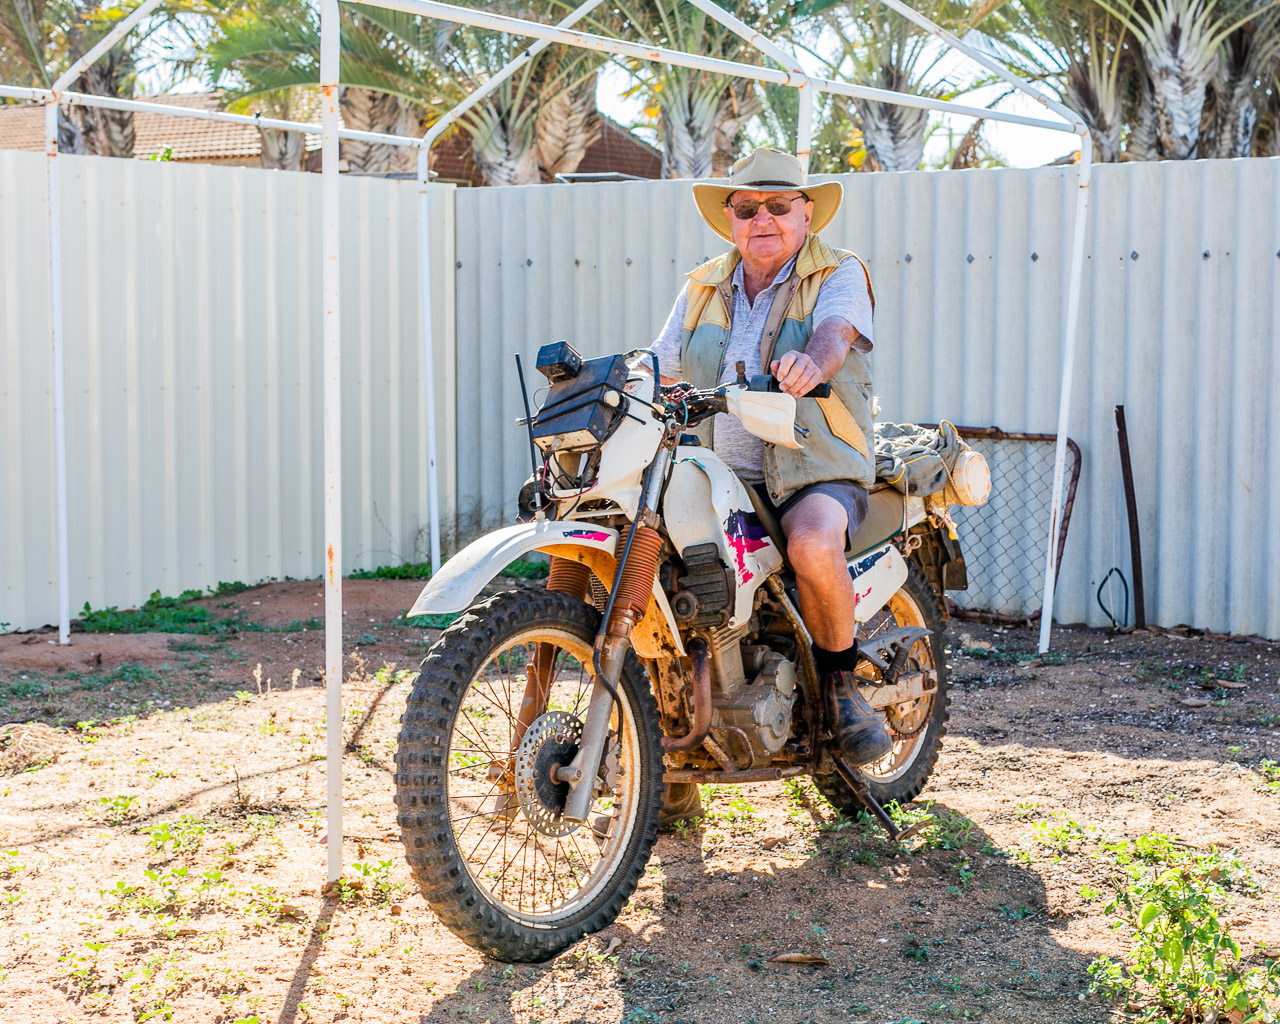 Old roo shooter on a motorbike